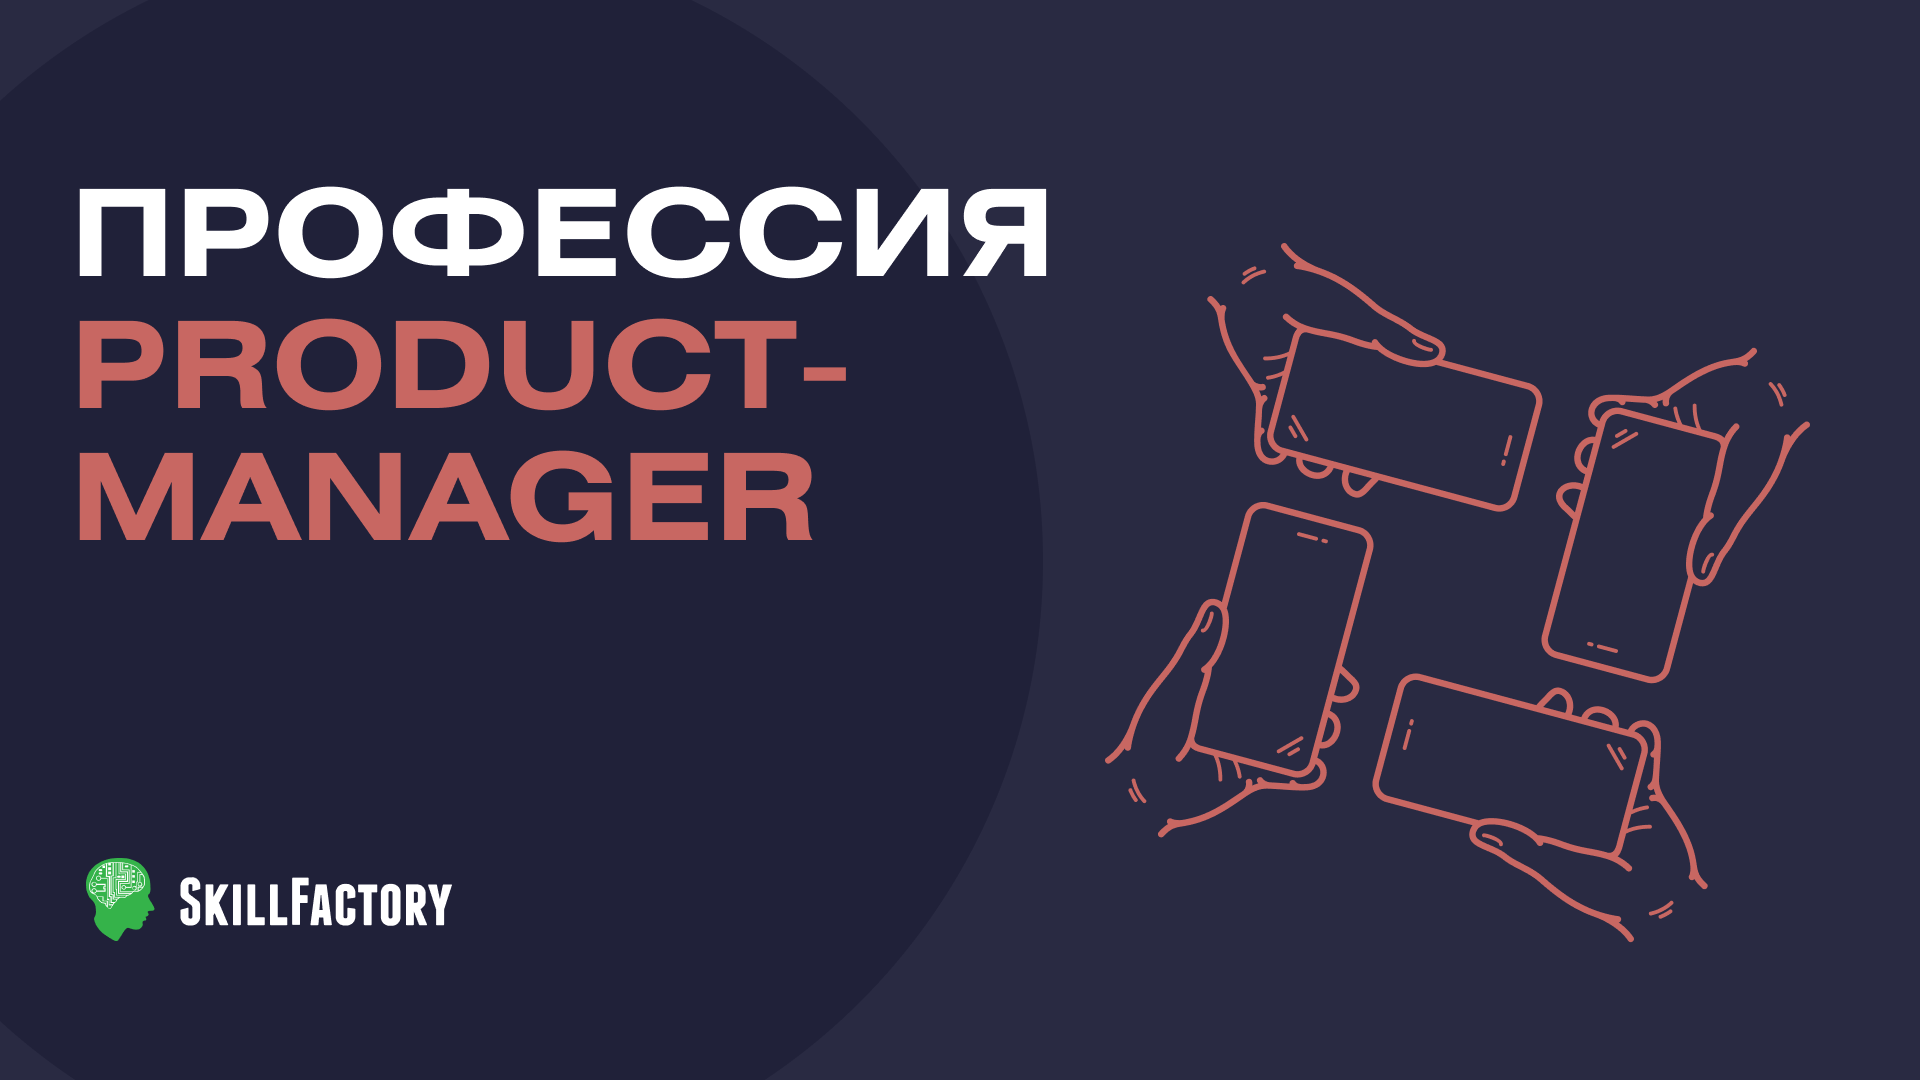 Профессия Product Manager